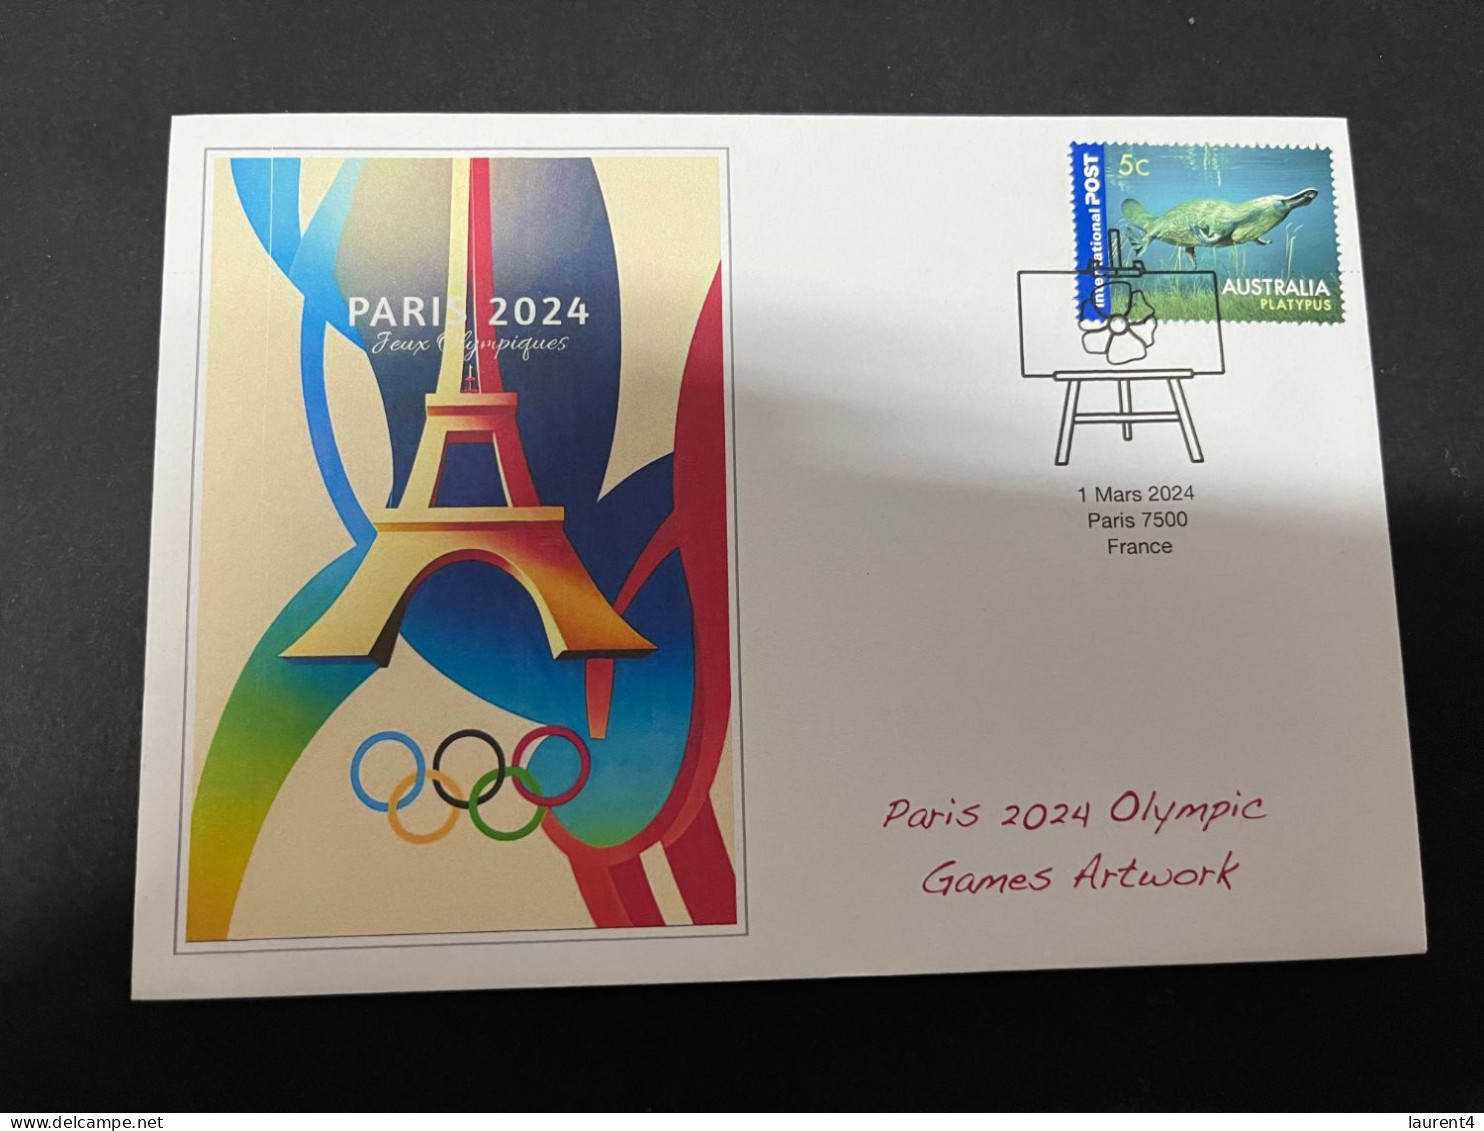 9-3-2024 (2 Y 33) Paris Olympic Games 2024 - 3 (of 12 Covers Series) For The Paris 2024 Olympic Games Artwork - Eté 2024 : Paris